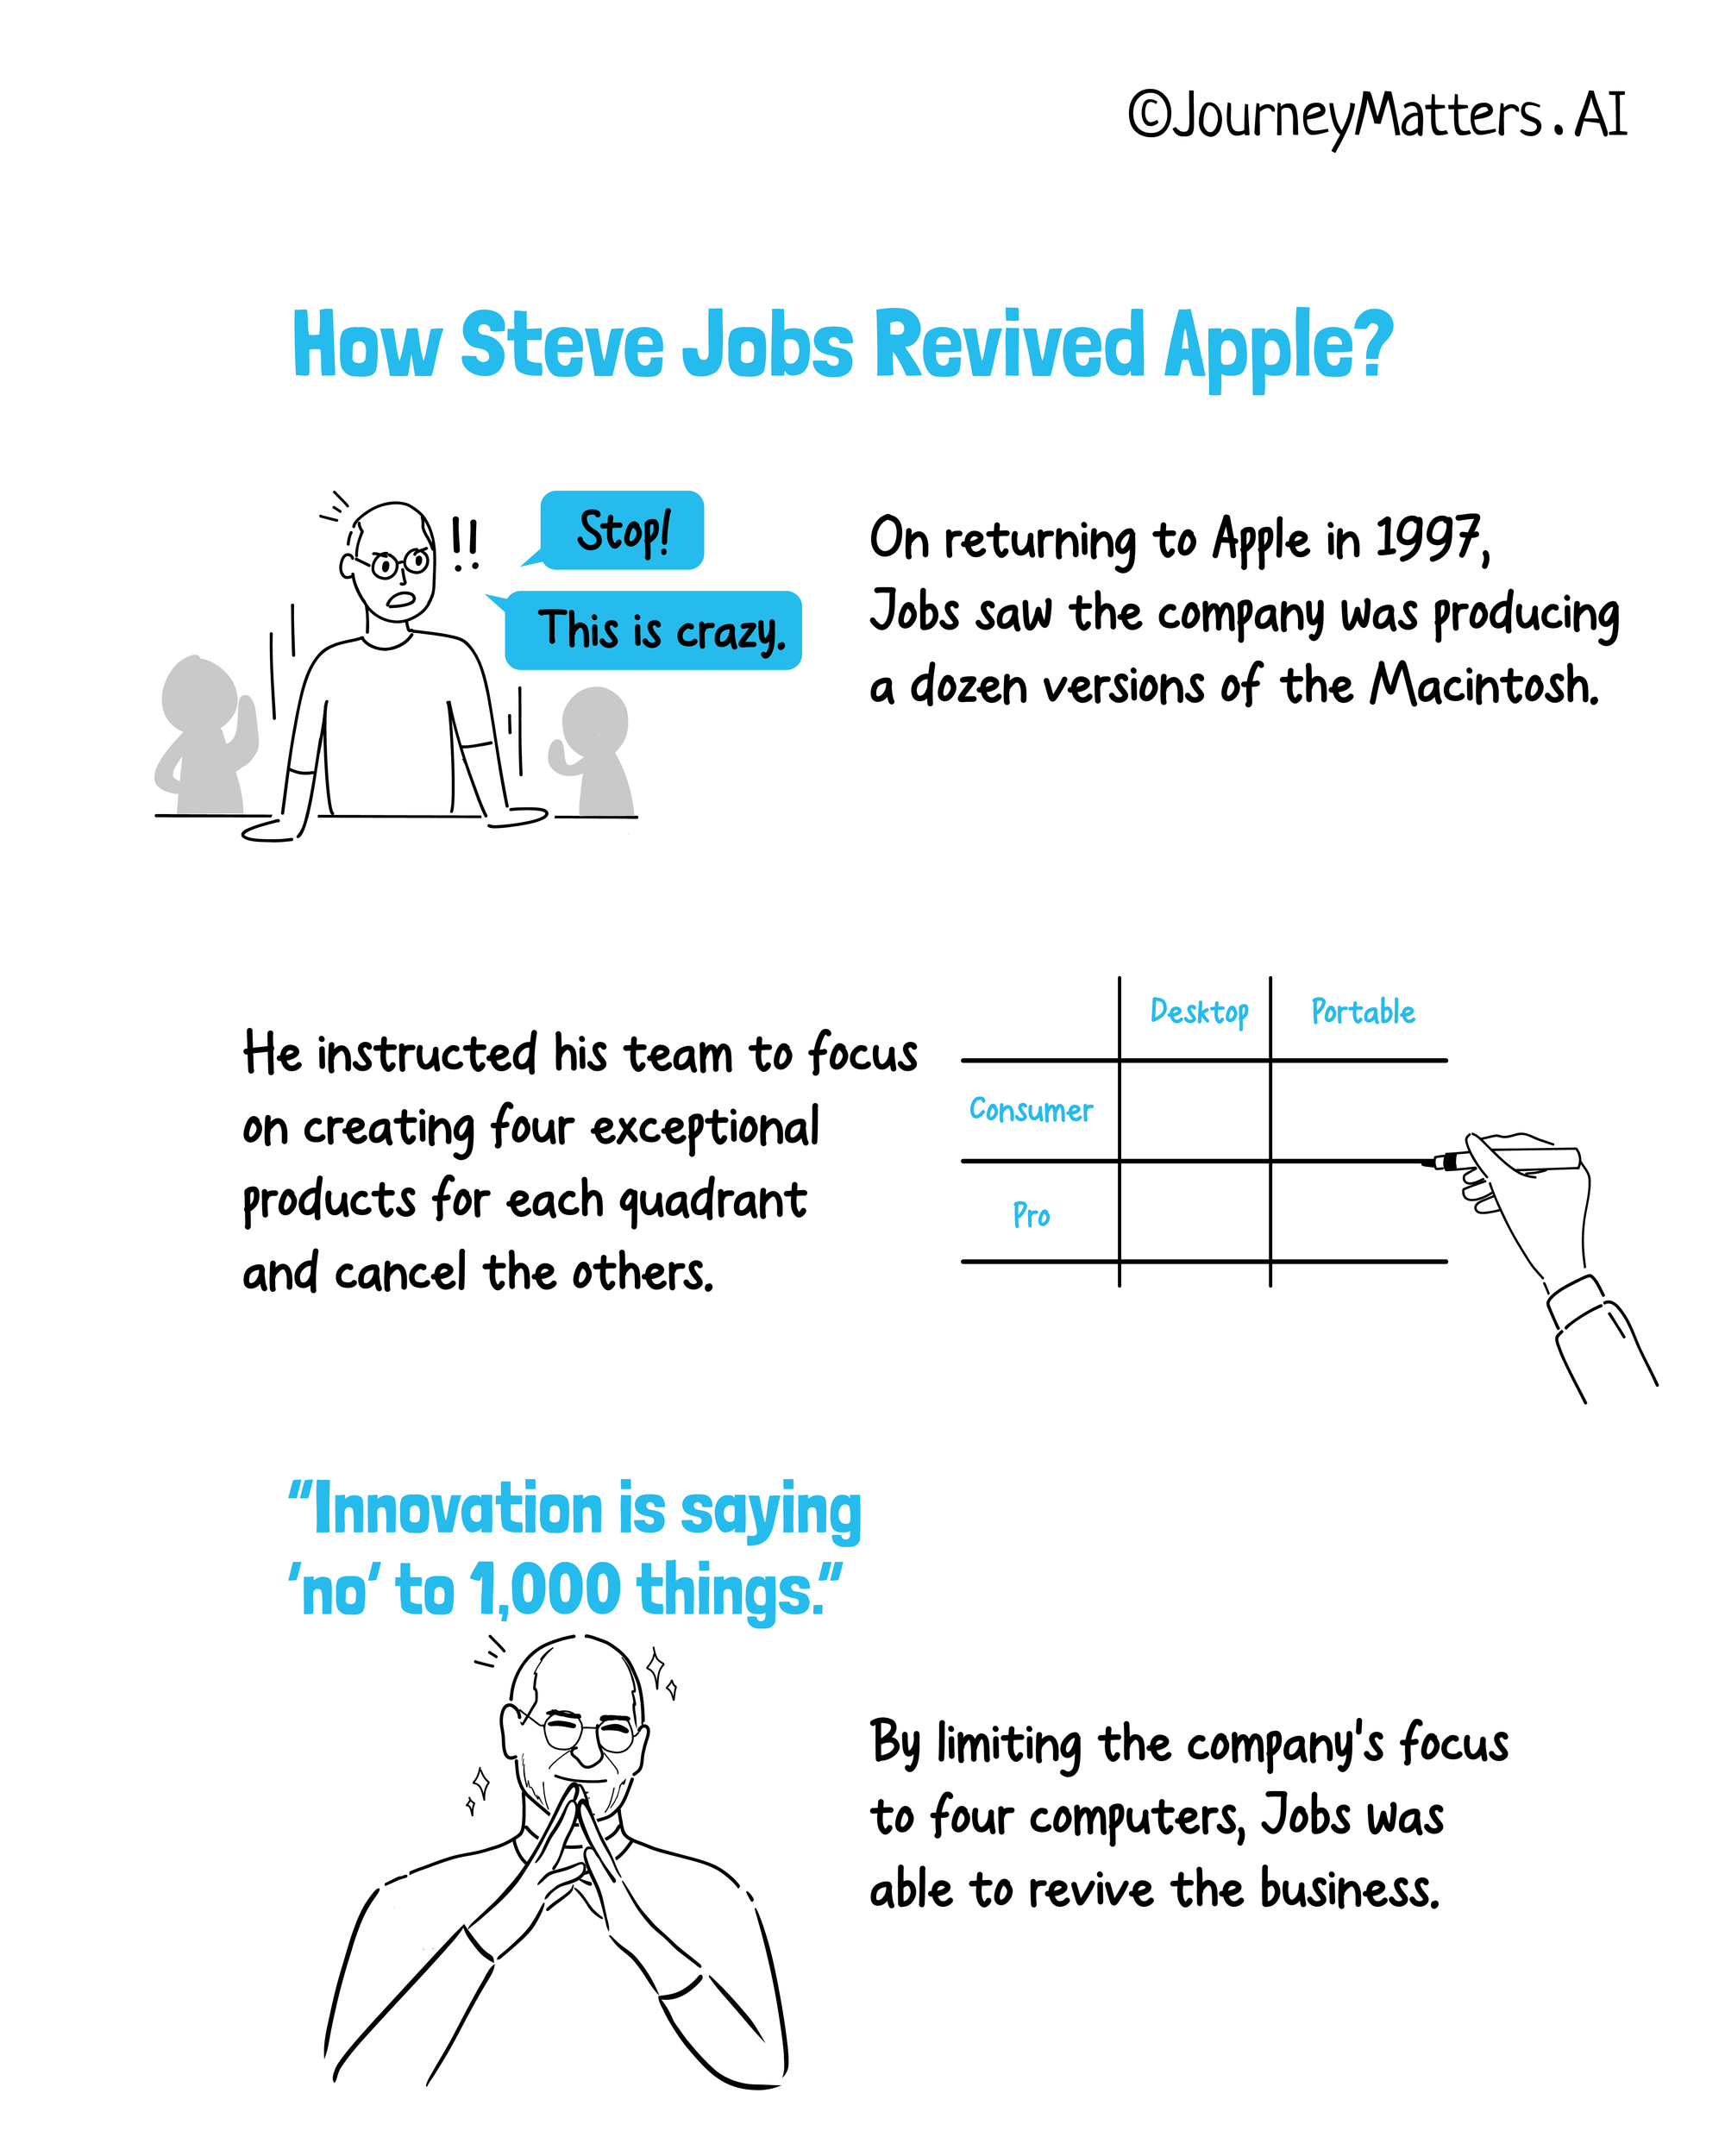 Steve Jobs revived Apple in 1997 by aligning the company's focus to only four machines and asking the team to let go of other ideas.